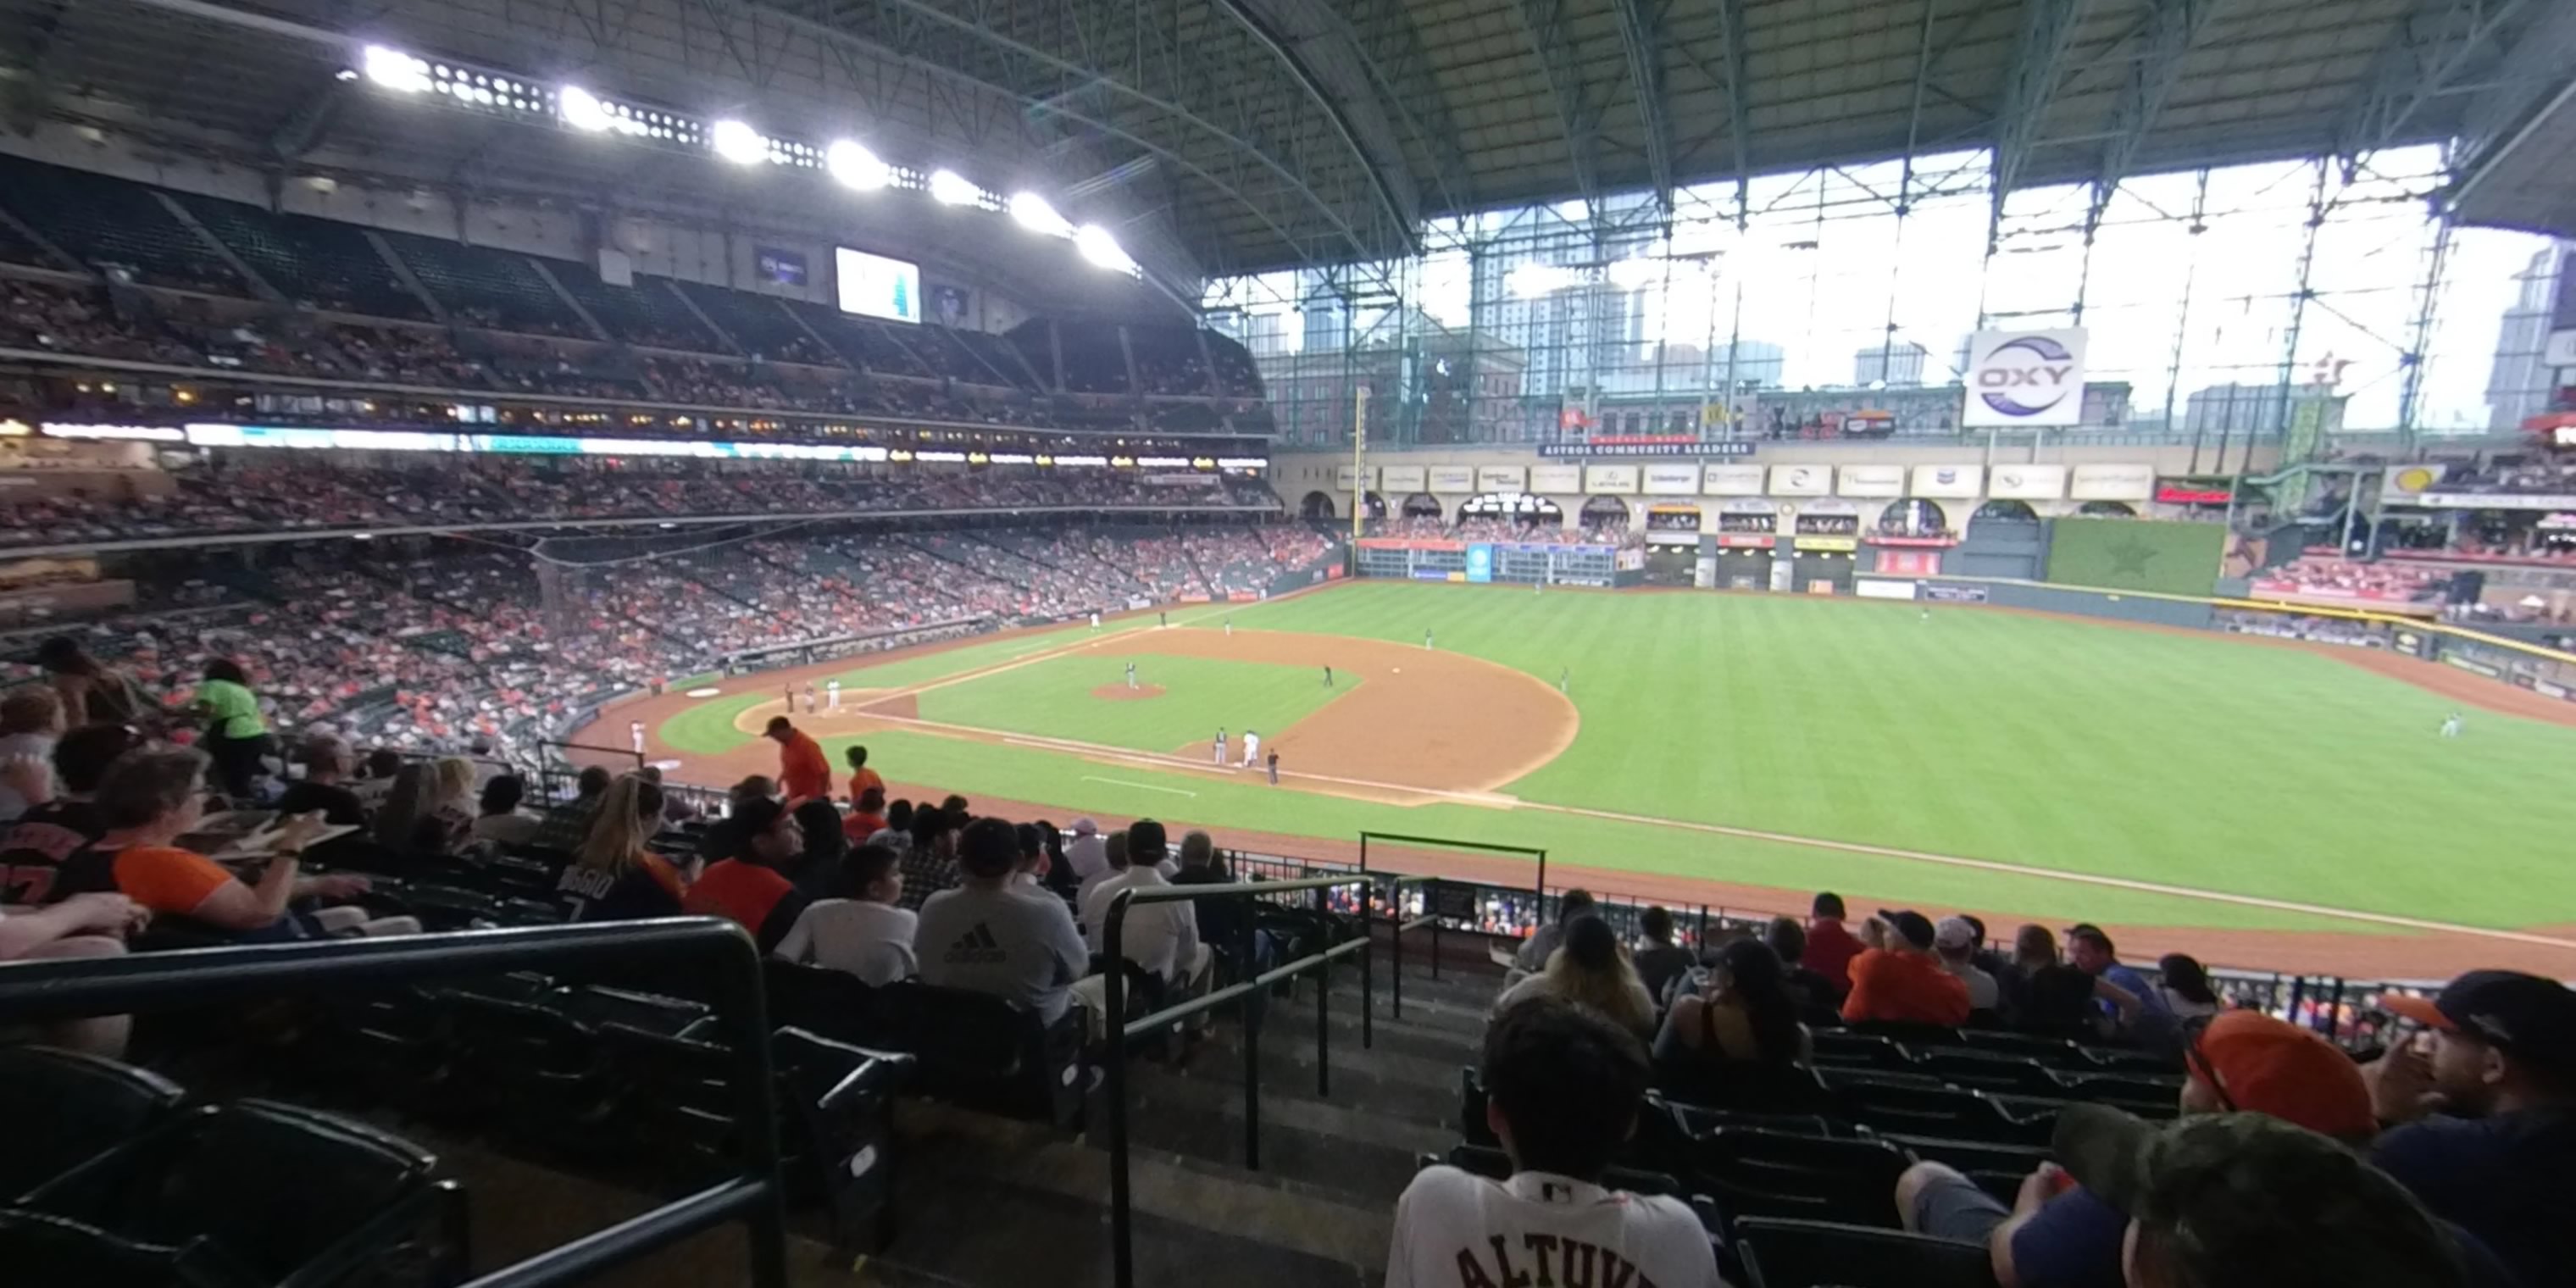 section 227 panoramic seat view  for baseball - minute maid park